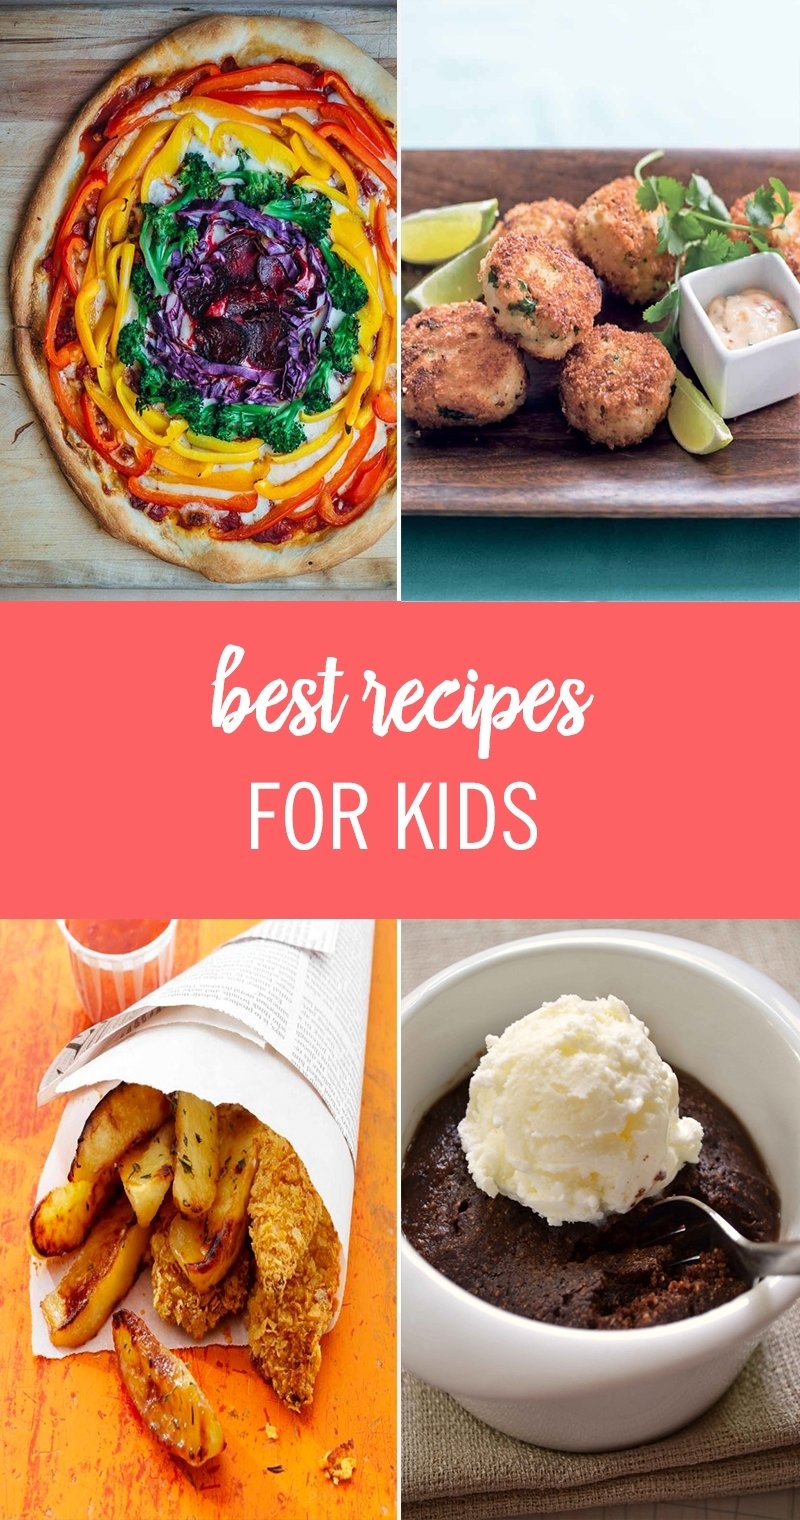 10 Trendy Healthy Food Ideas For Kids cooking for kids 50 best recipes for kids and picky eaters 13 2022